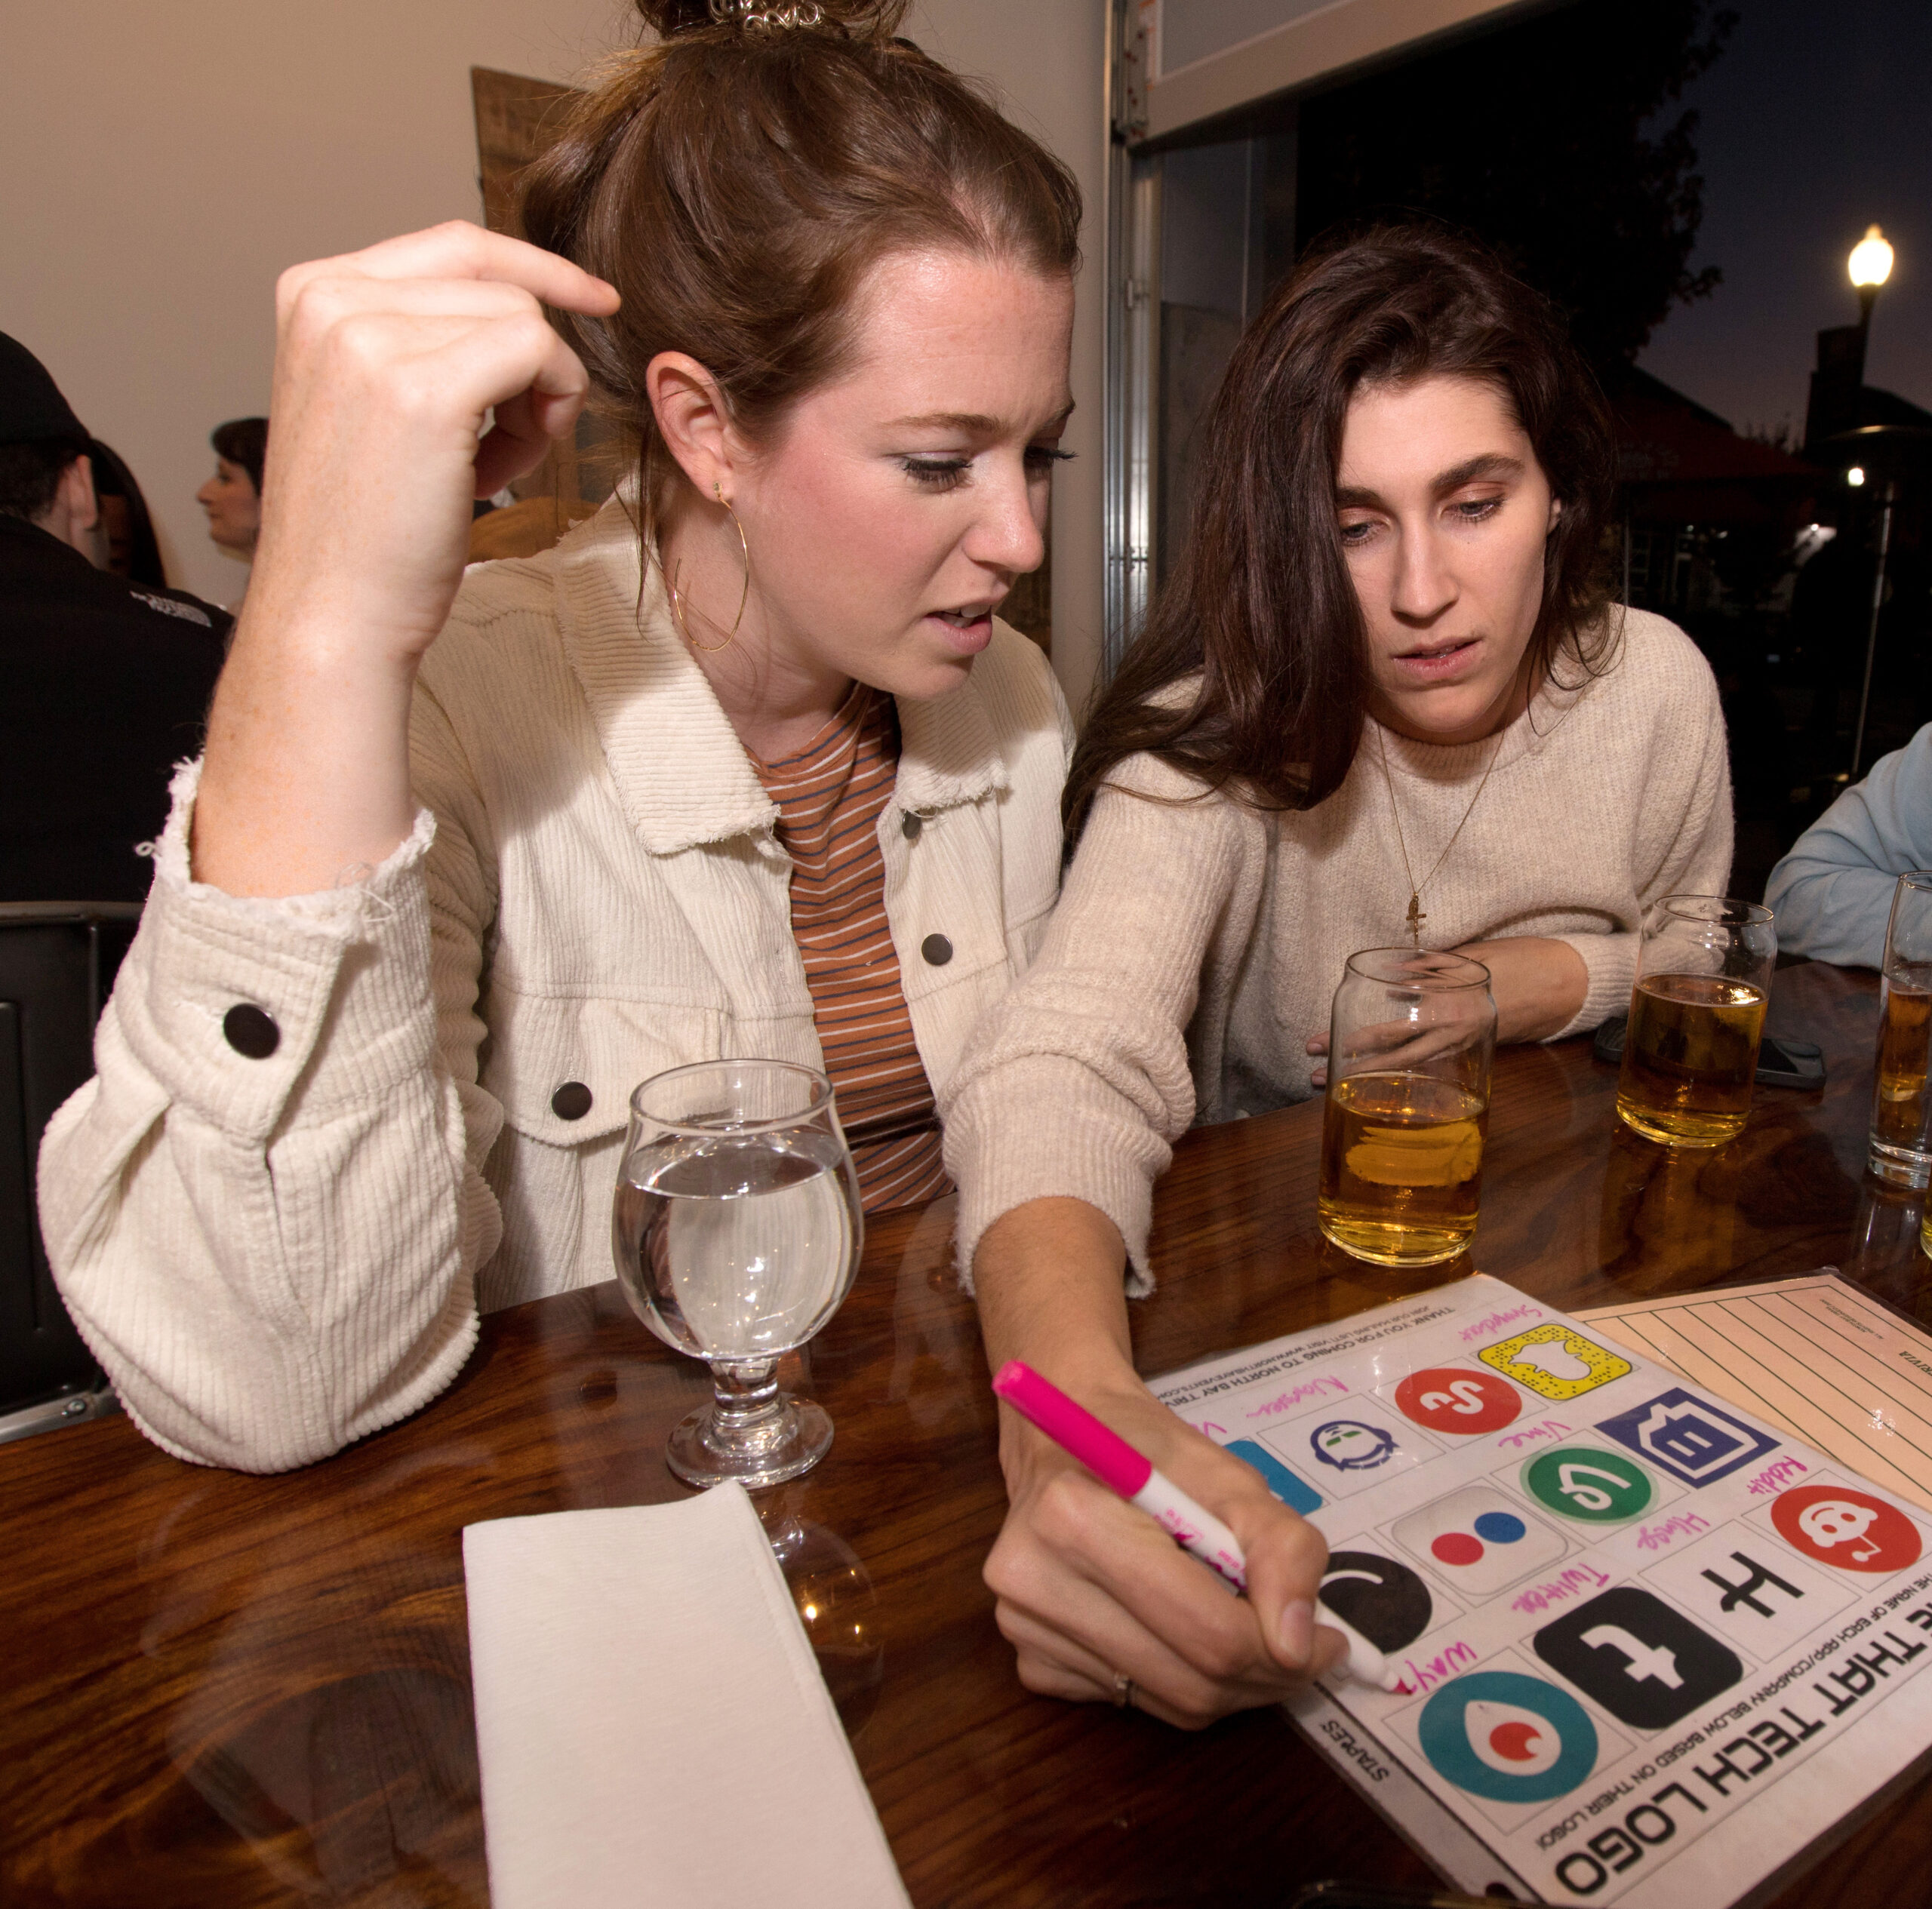 From left, Pierce Neitzke, and Lauren Holt, both of Austin, Texas, answer trivia questions during trivia night presented by North Bay Trivia at Golden State Cider Taproom, Thursday, October 13, 2022, in Sebastopol. (Darryl Bush / For The Press Democrat)